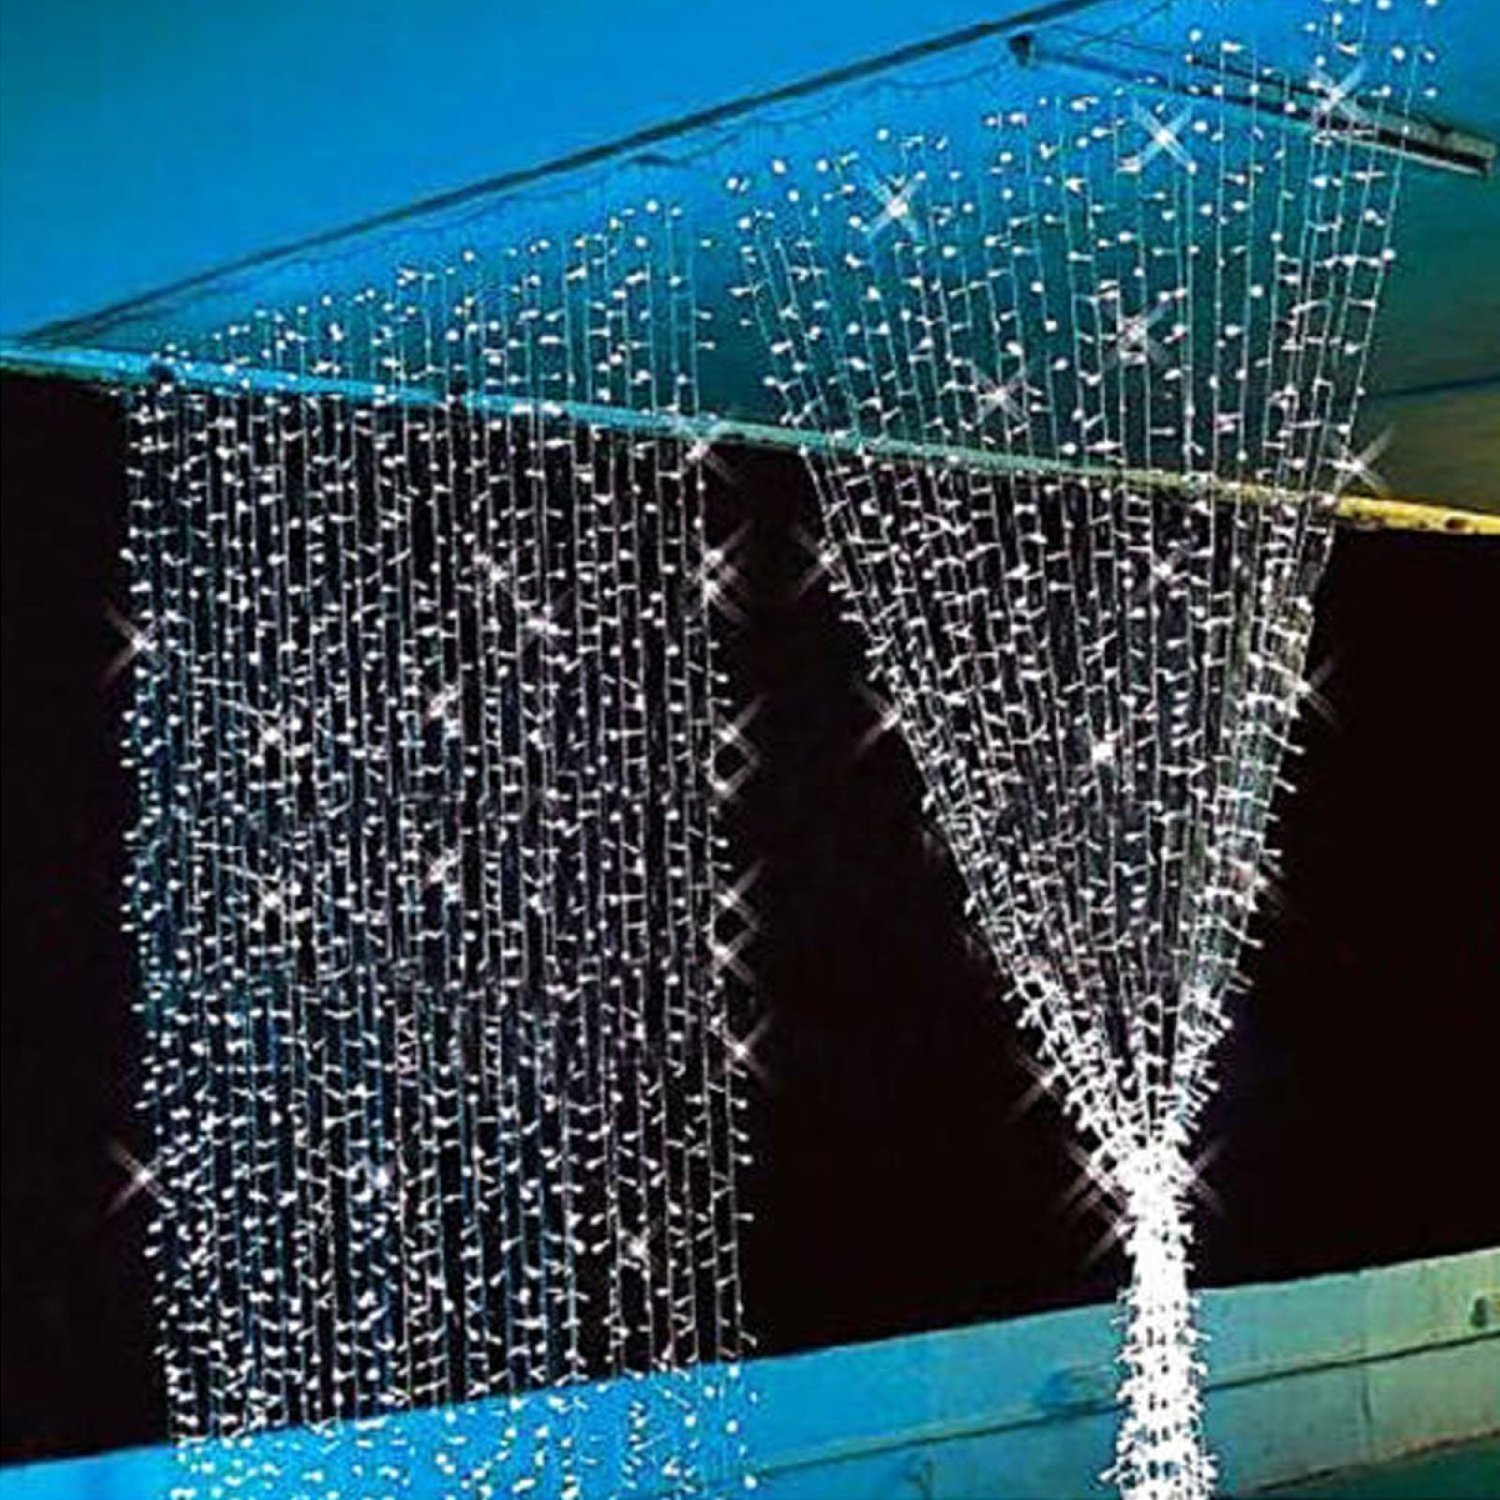 3Mx3M 300LED String Light Curtain Light for Christmas Xmas Wedding Party Home Decoration - White - image 4 of 13